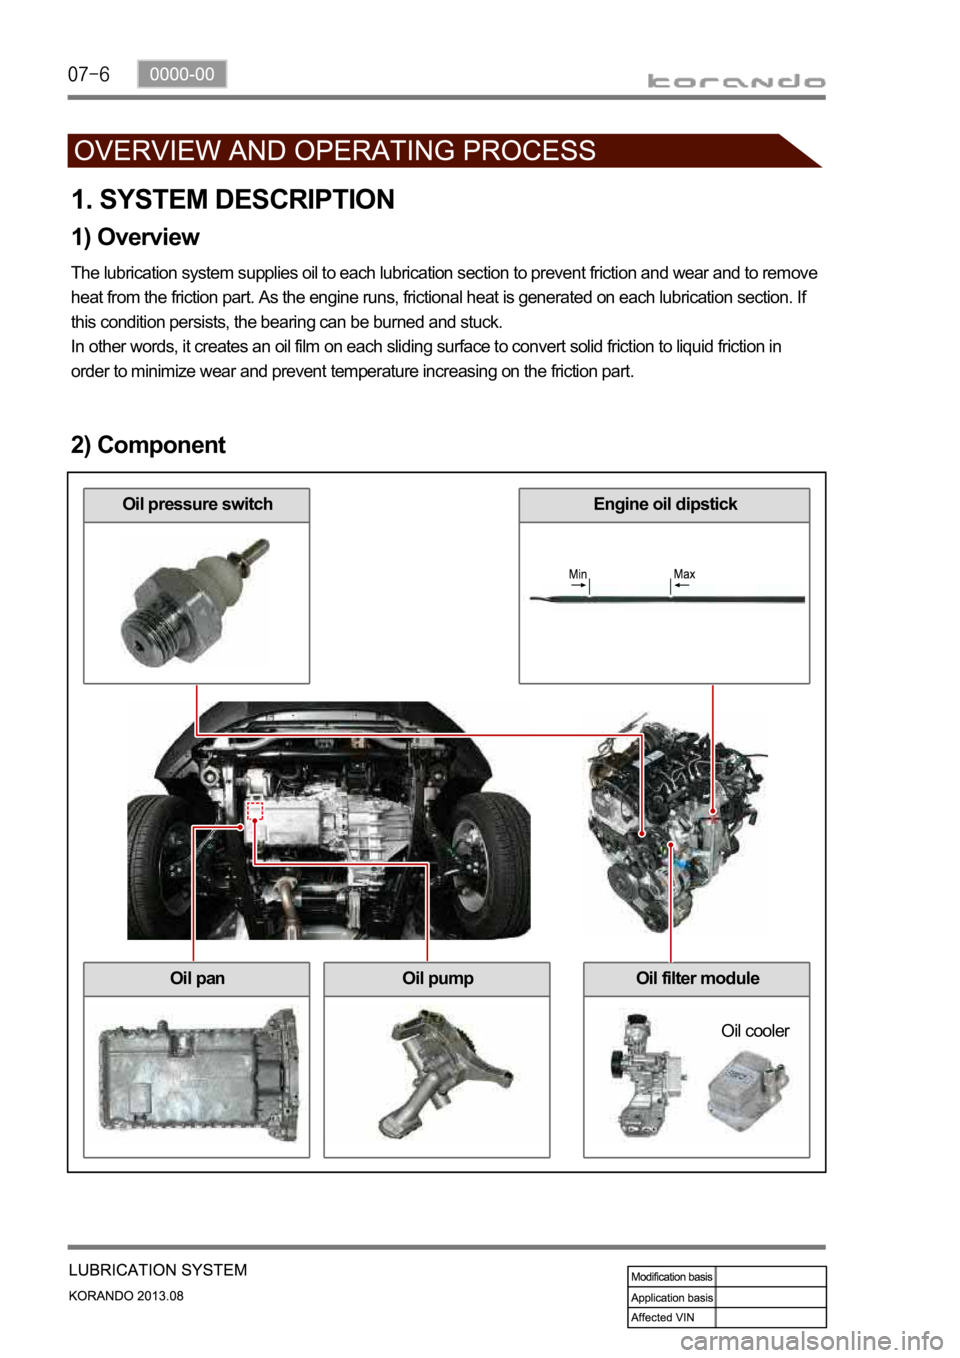 SSANGYONG KORANDO 2013  Service Manual 1. SYSTEM DESCRIPTION
1) Overview
The lubrication system supplies oil to each lubrication section to prevent friction and wear and to remove 
heat from the friction part. As the engine runs, frictiona